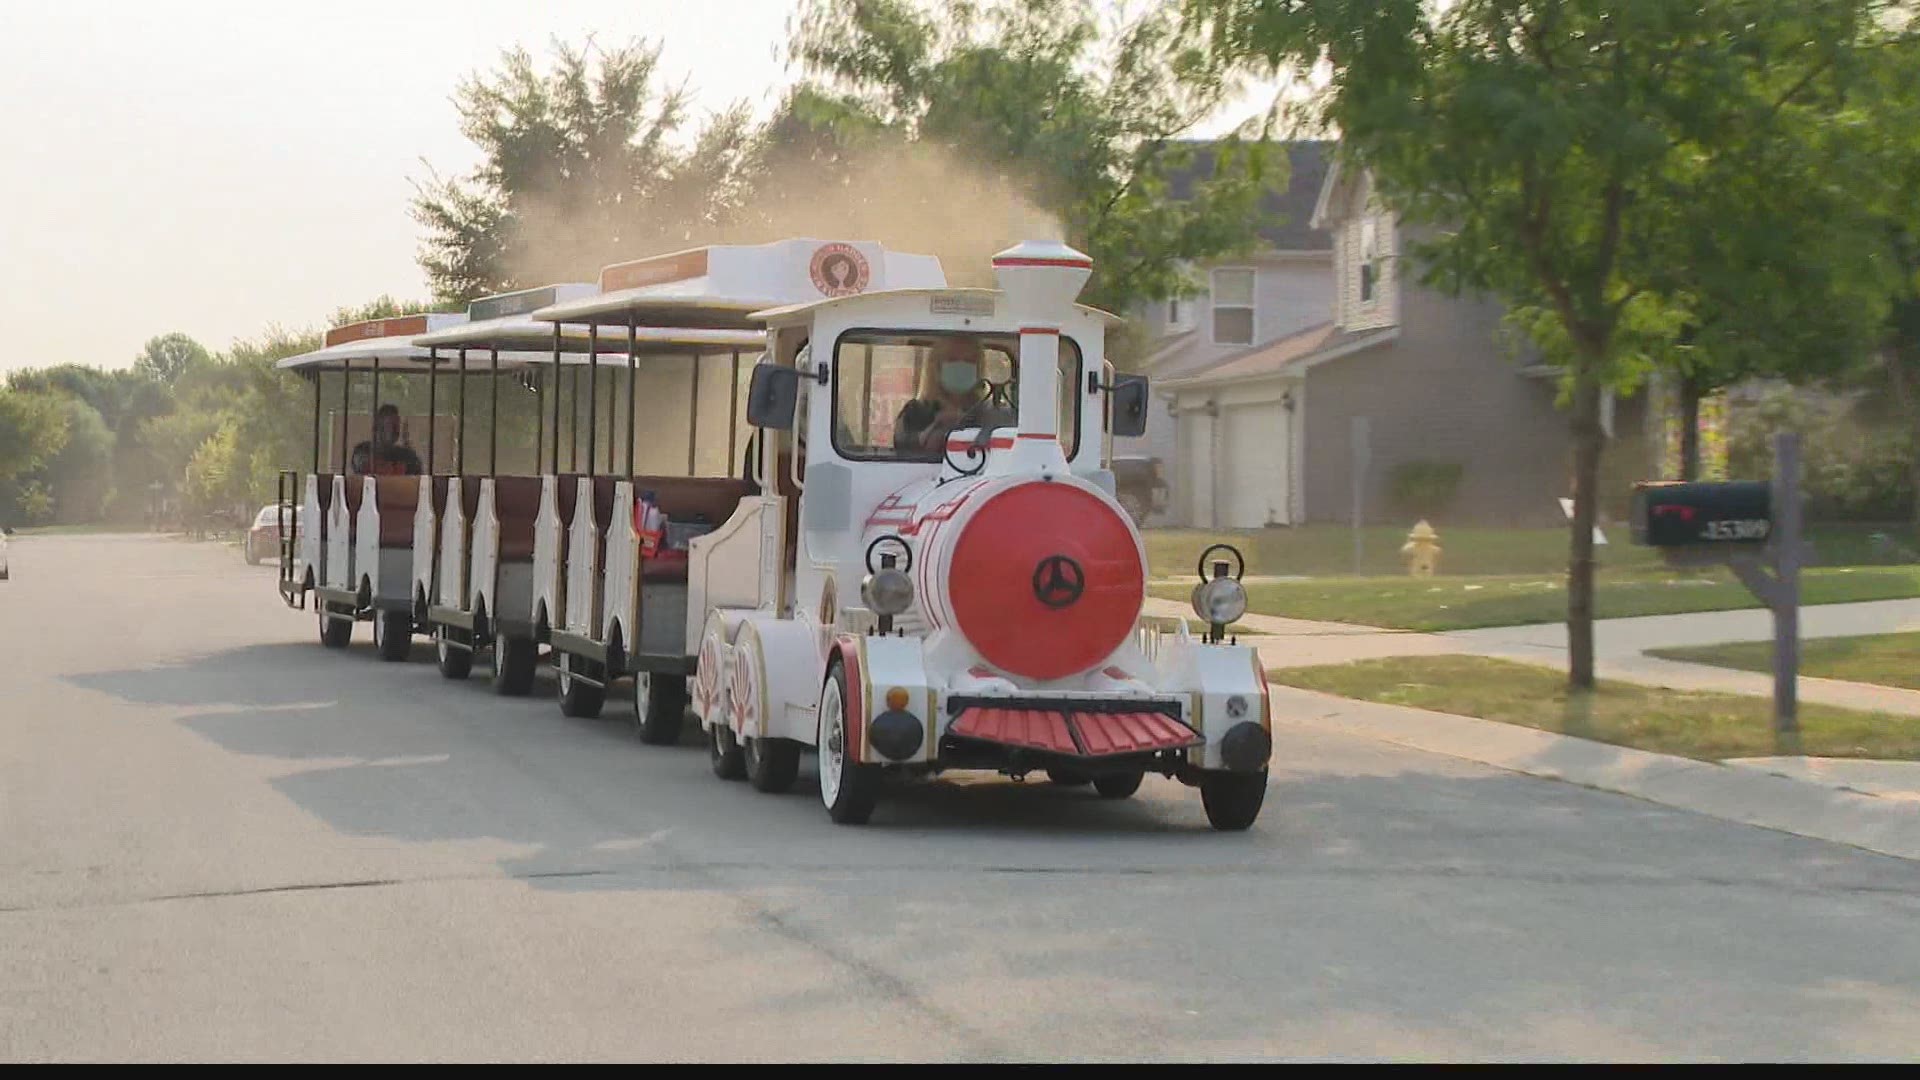 Ashlin Hadden was looking for a way to entertain her kids during the pandemic, so she bought a train! Now, she's giving free rides to kids and parents.